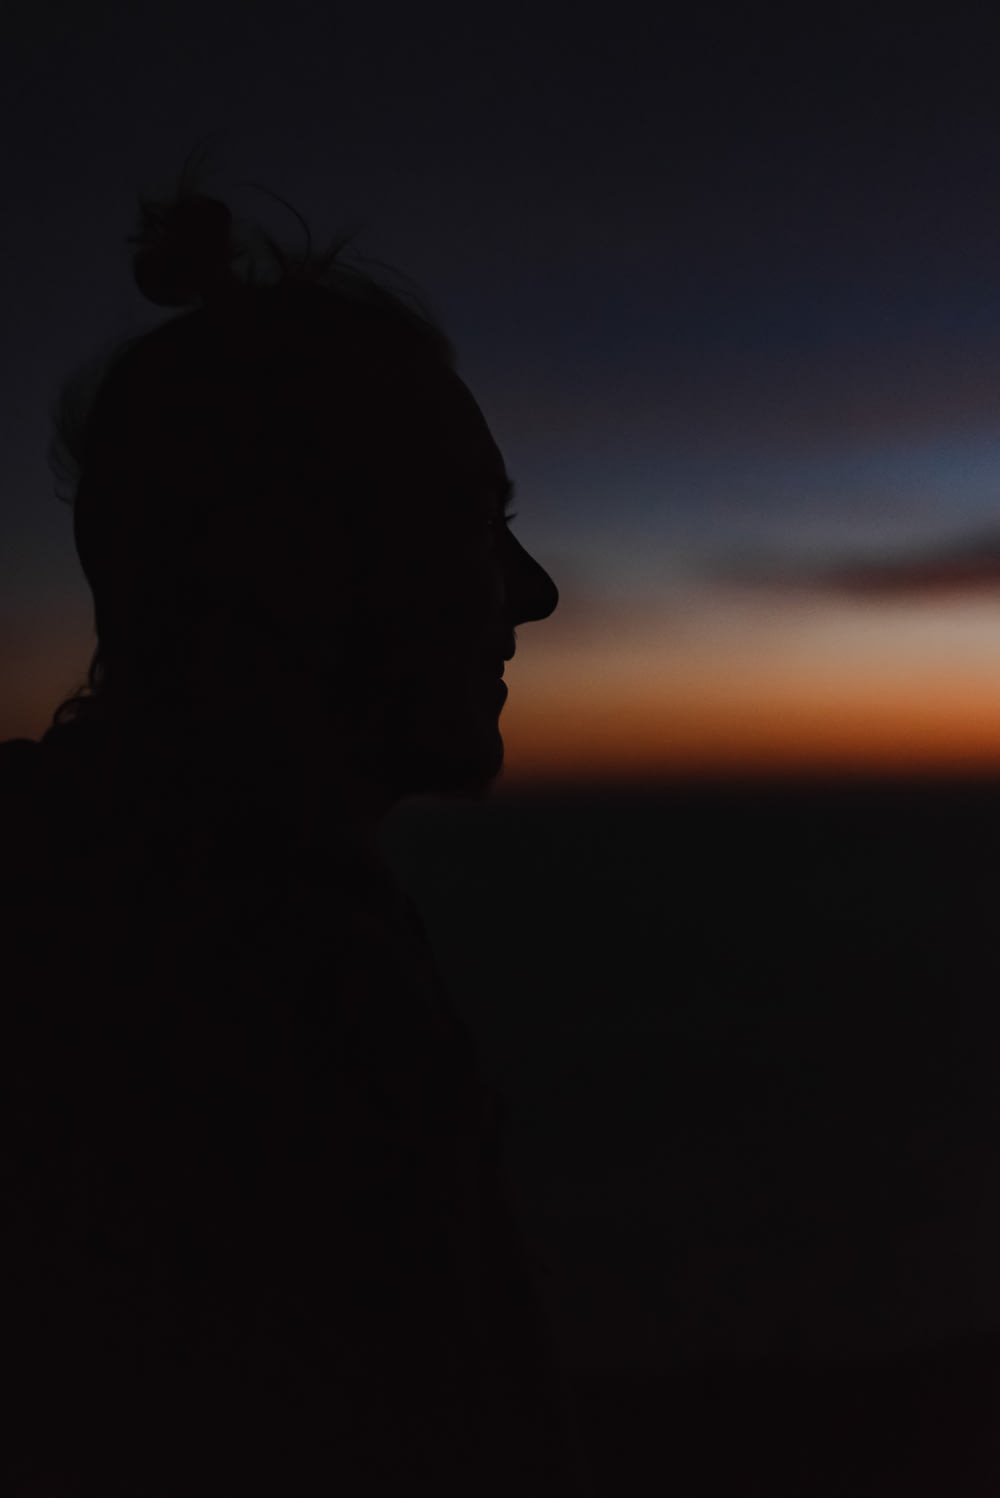 silhouette of person during sunset